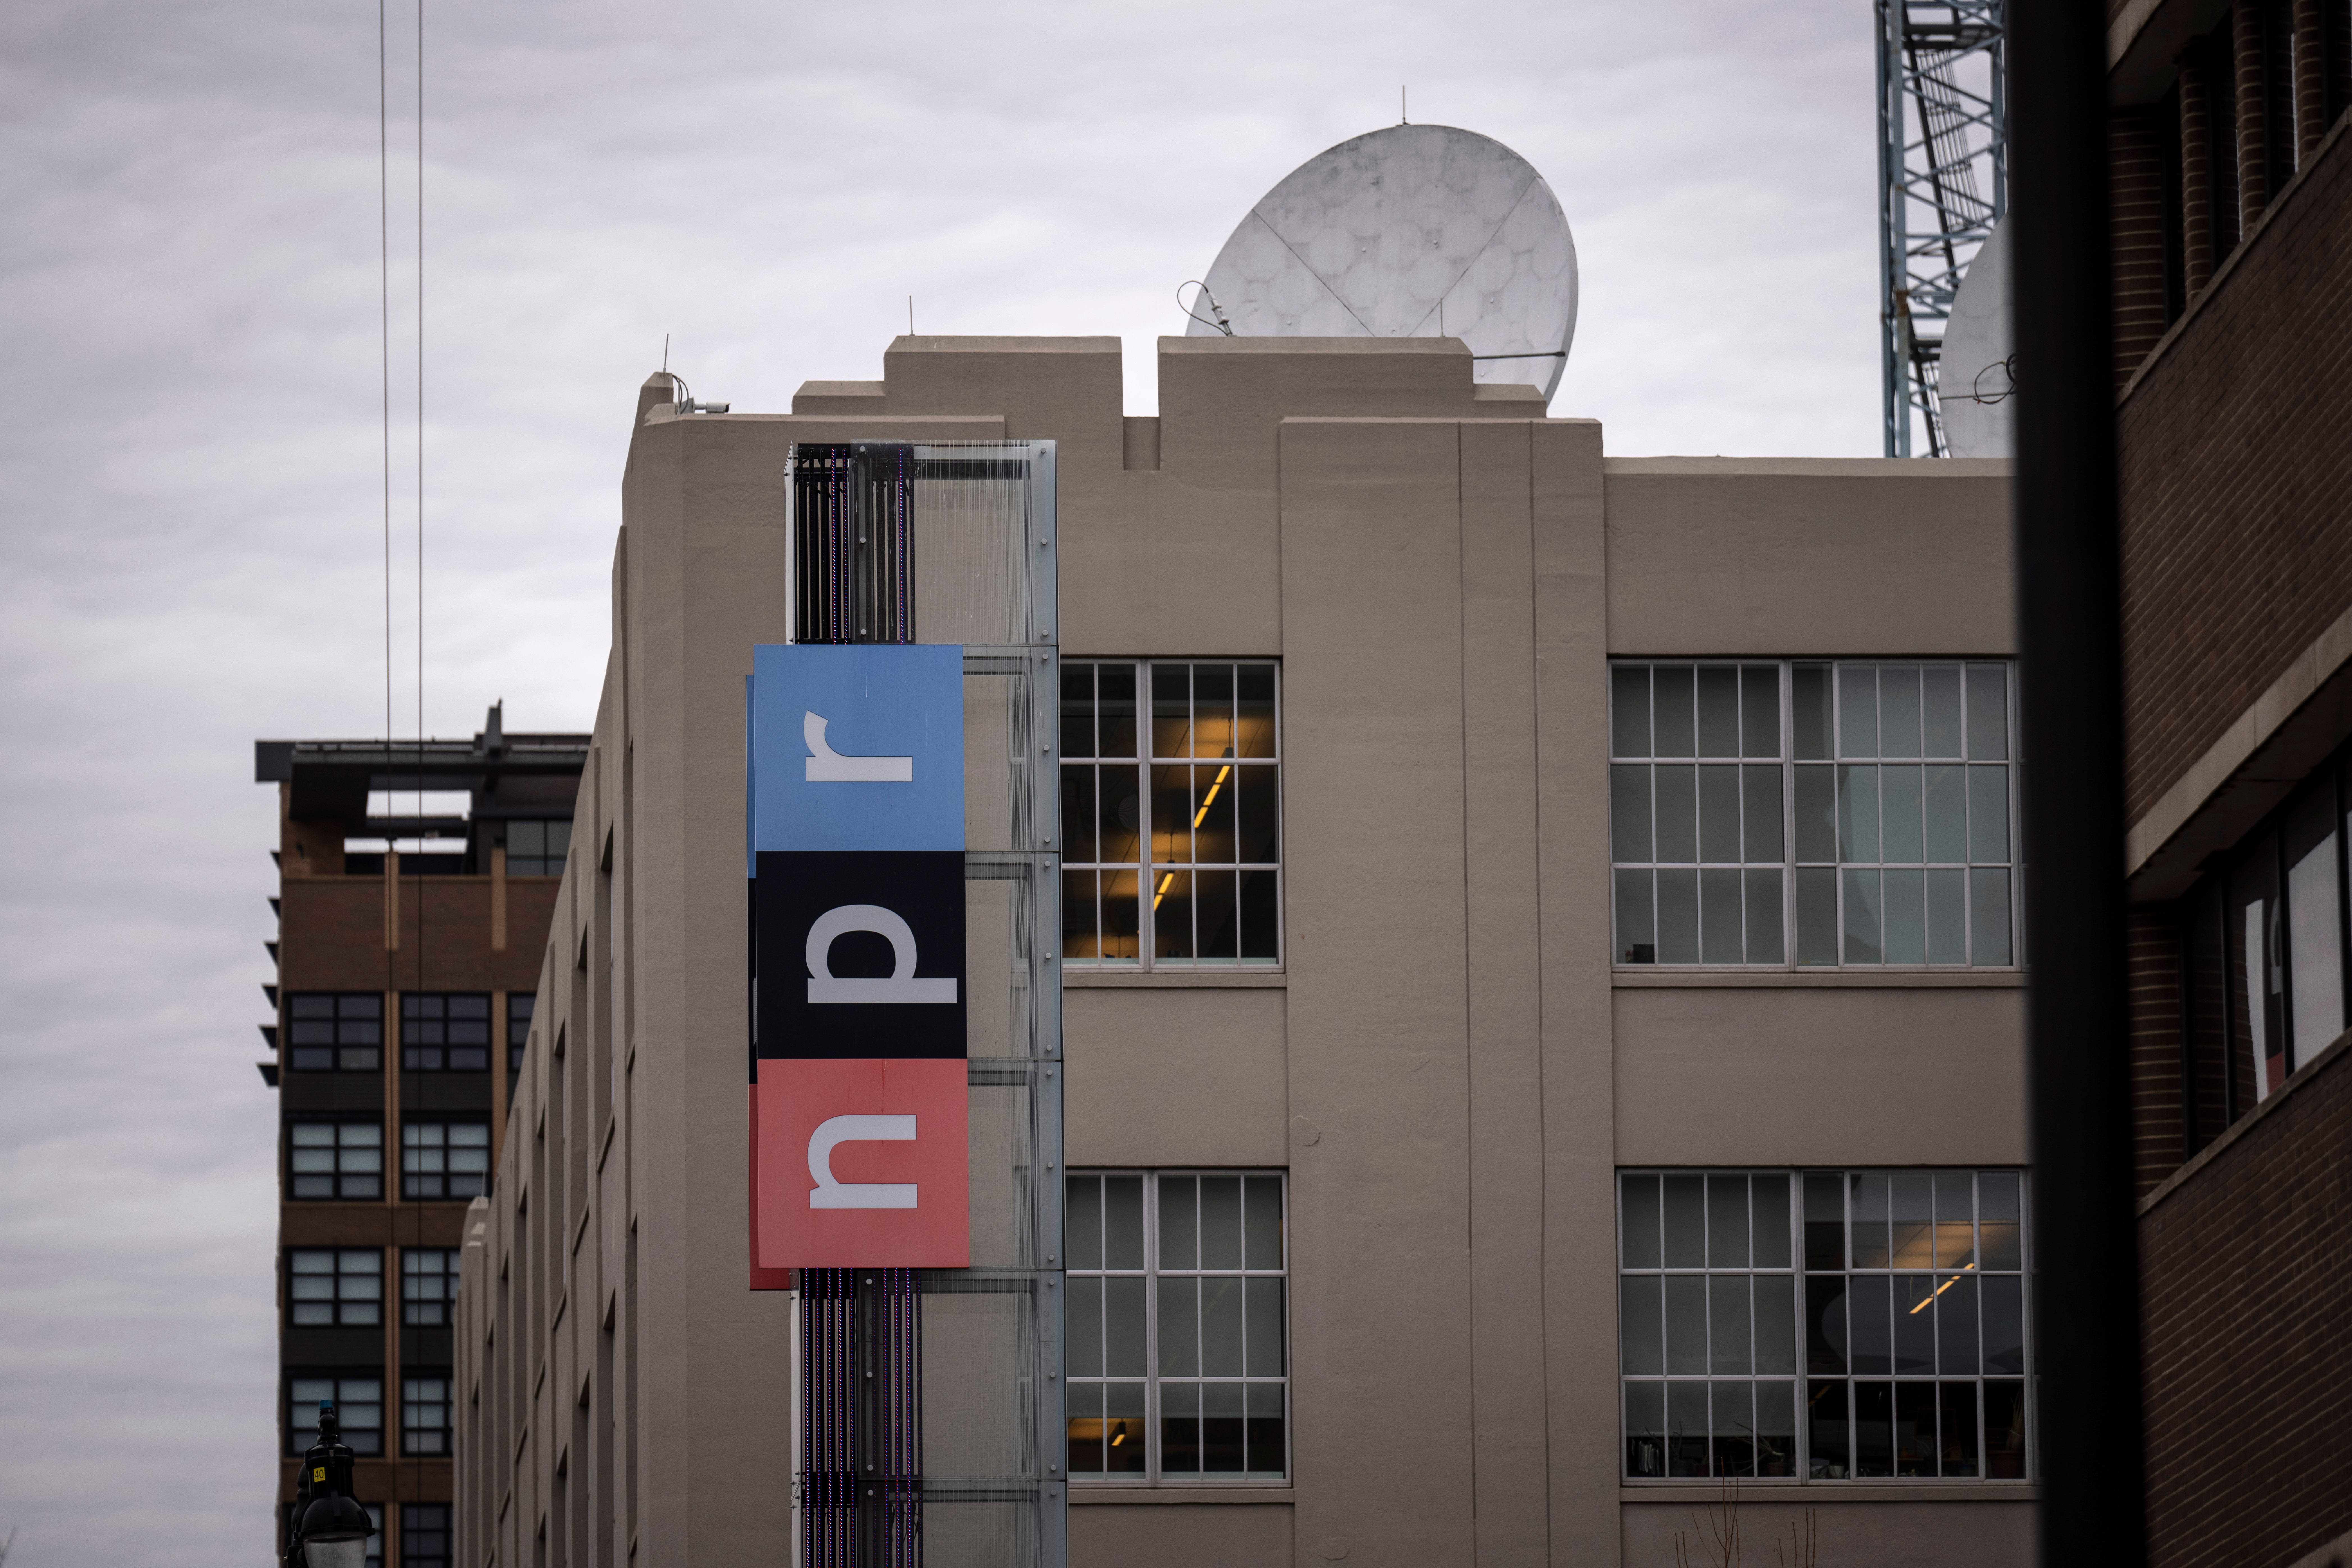 Conservatives trashed NPR's new CEO for being 'woke.' But the truth is far more complex.